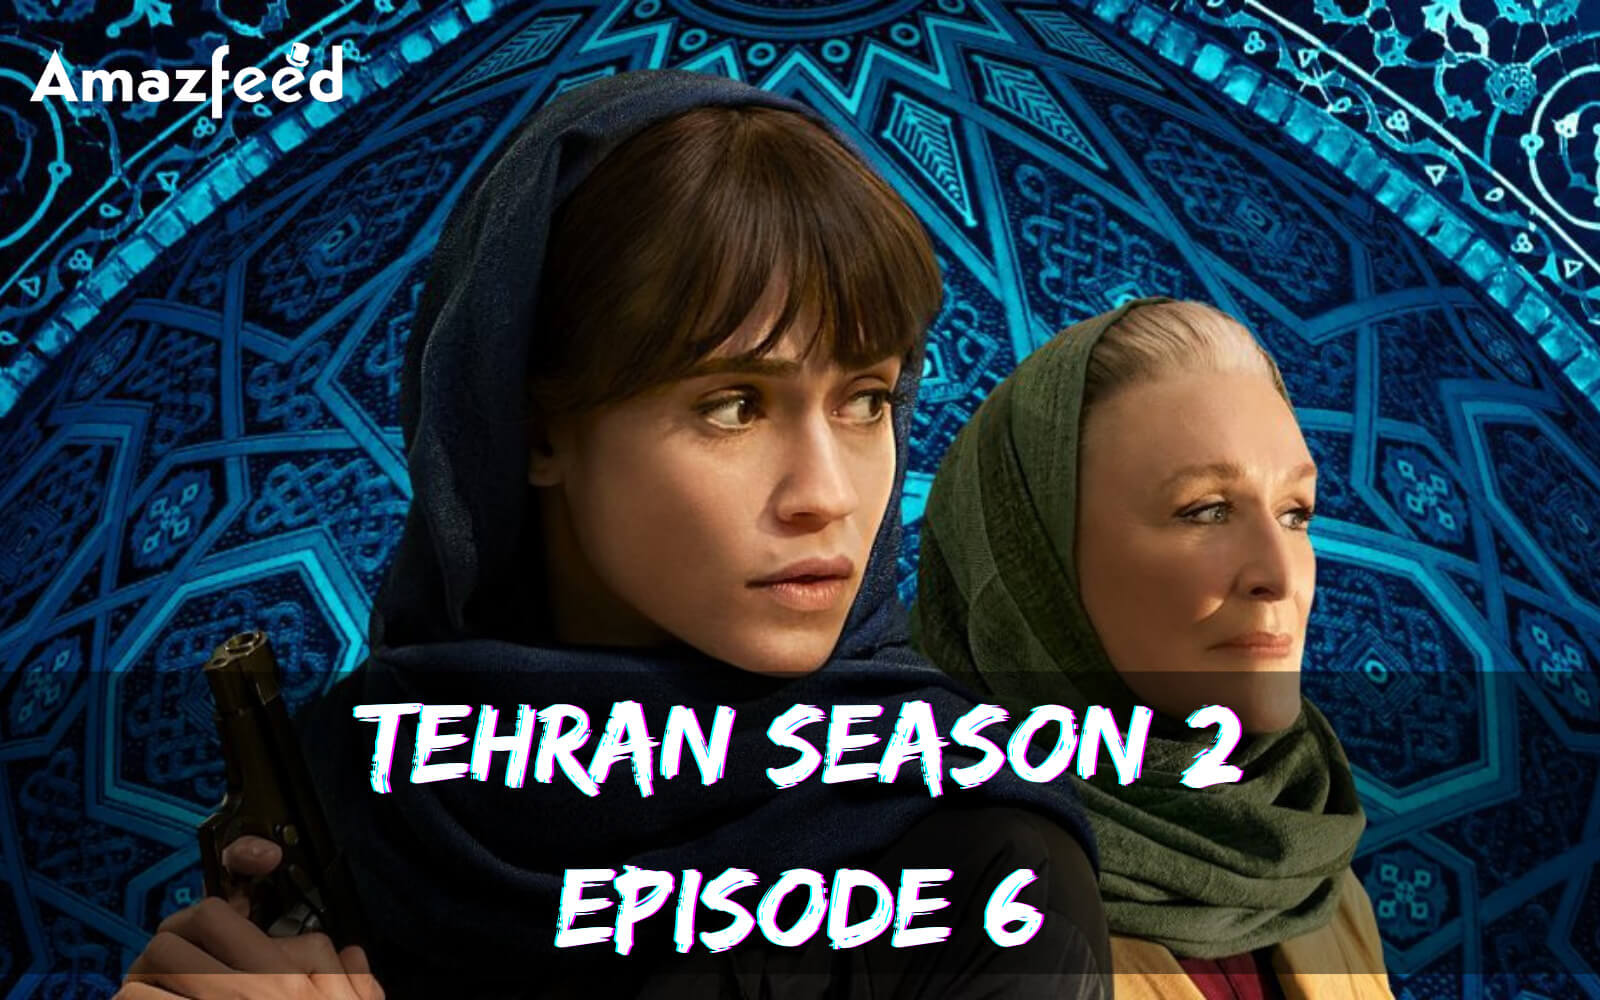 When Is Tehran Season 2 Episode 6 Coming Out (Release Date)